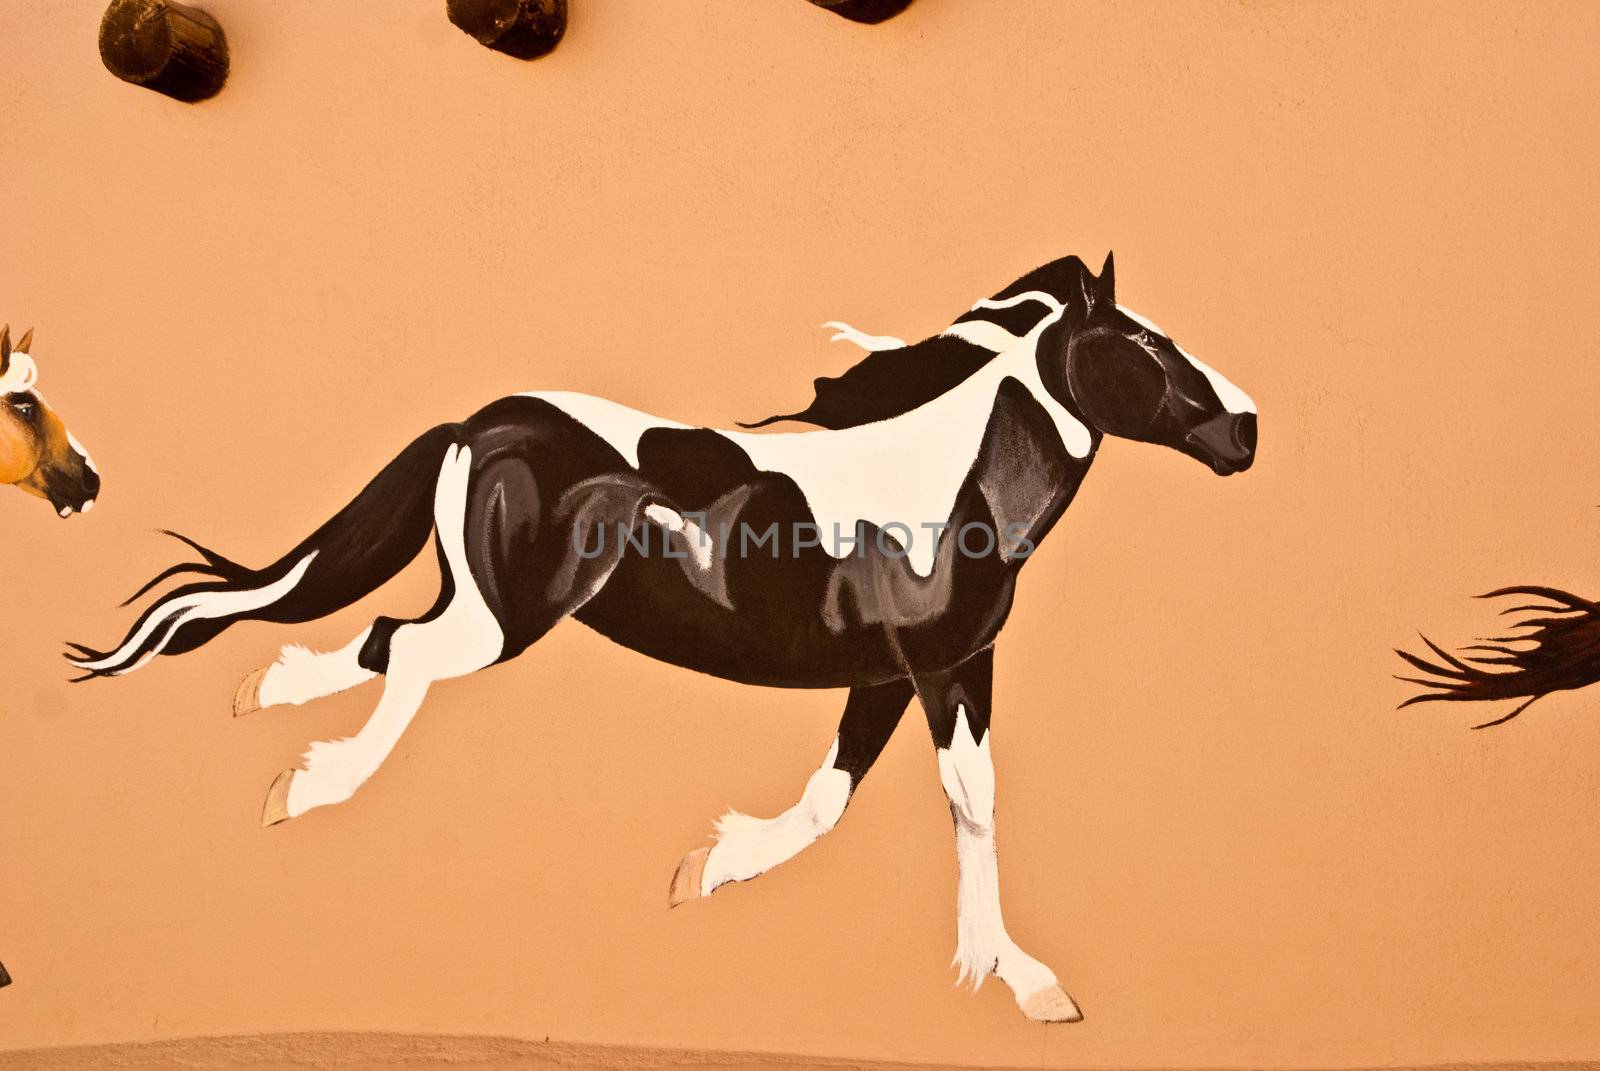 TAOS, NEW MEXICO/USA - OCTOBER 20: Mural depicting wild painted horses on walls of old town shown on October 20, 2011 in Taos, New Mexico. Taos is world famous for arts and culture.